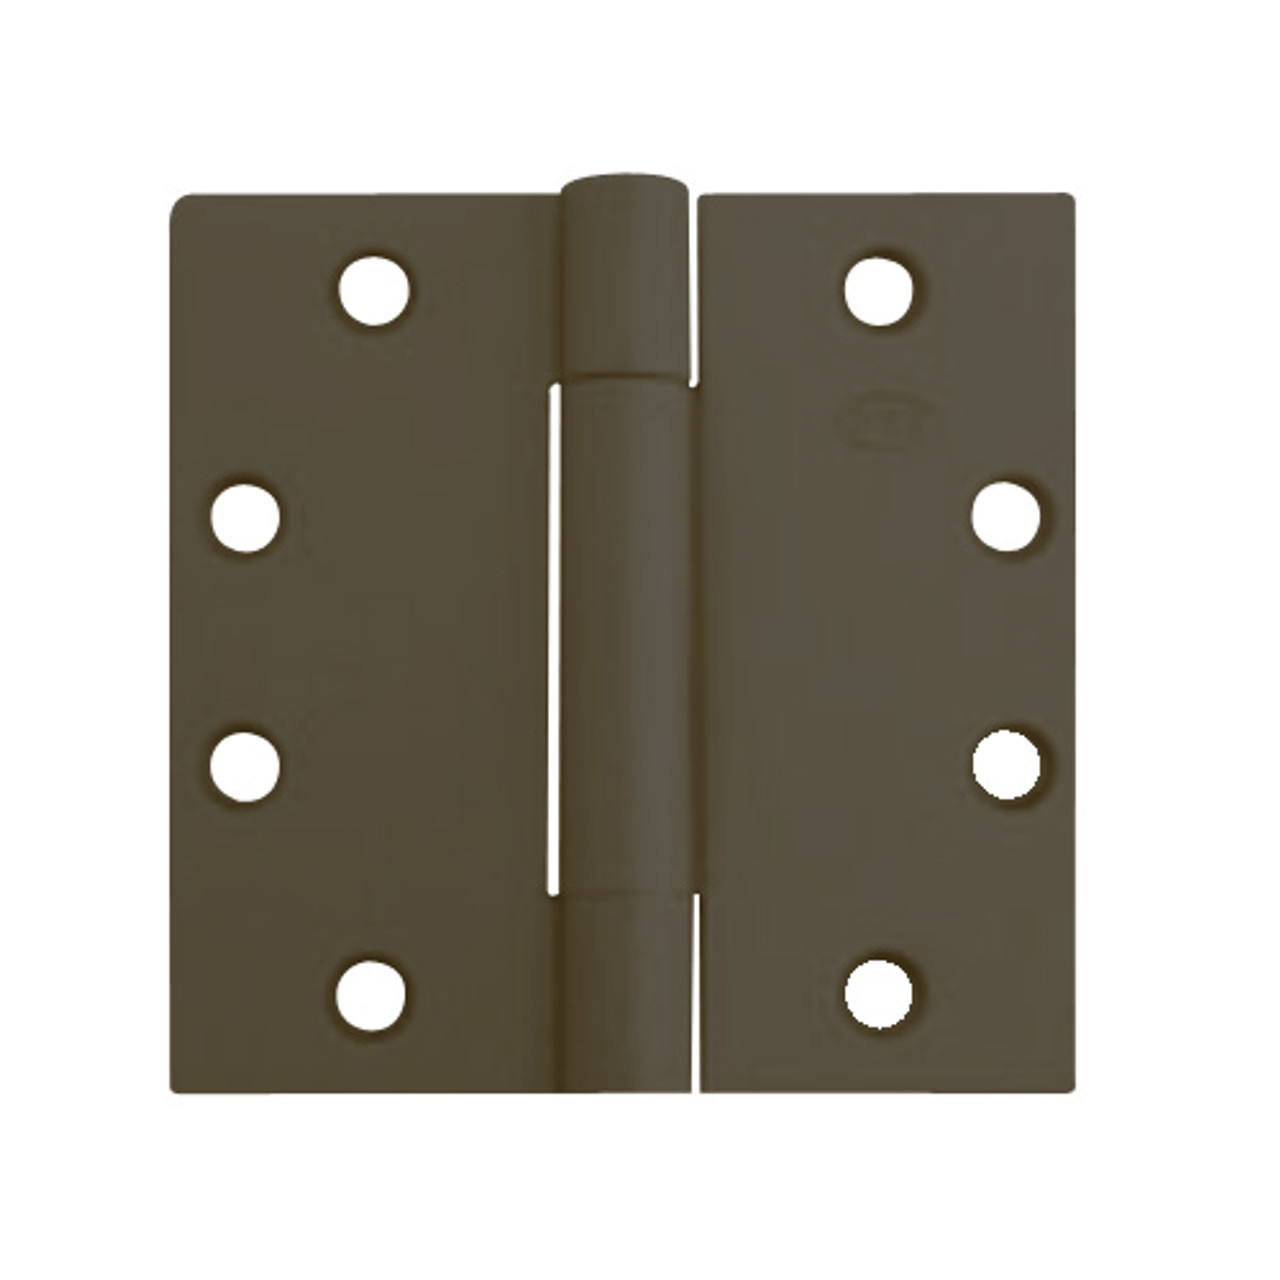 3CB1HW-5x5-641-TW4 IVES 3 Knuckle Concealed Bearing Full Mortise Hinge with Electric Thru-Wire in Oxidized Satin Bronze